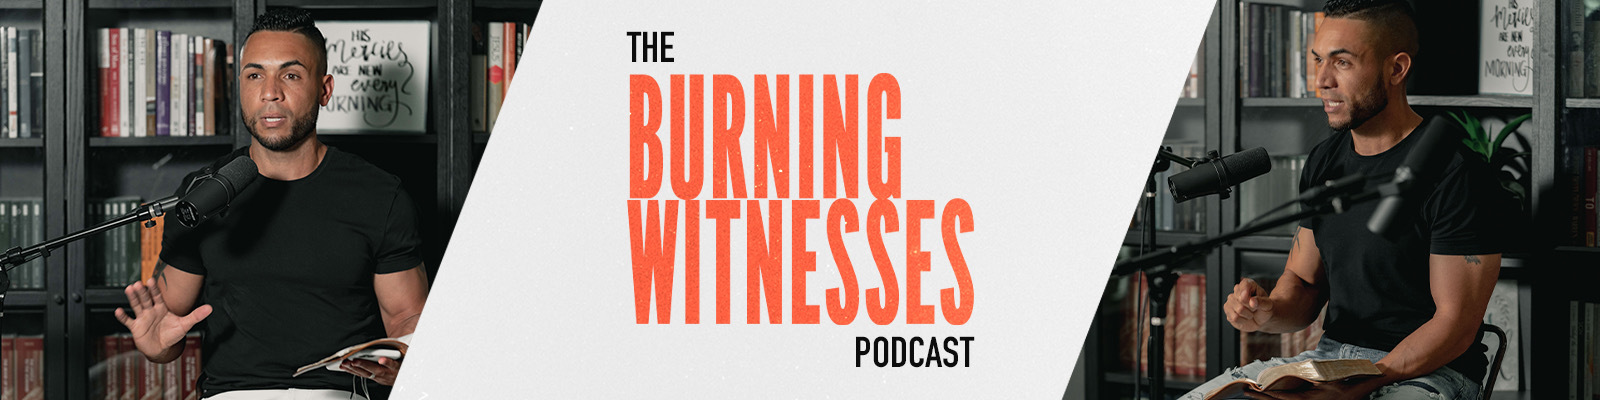 The Burning Witnesses Podcast